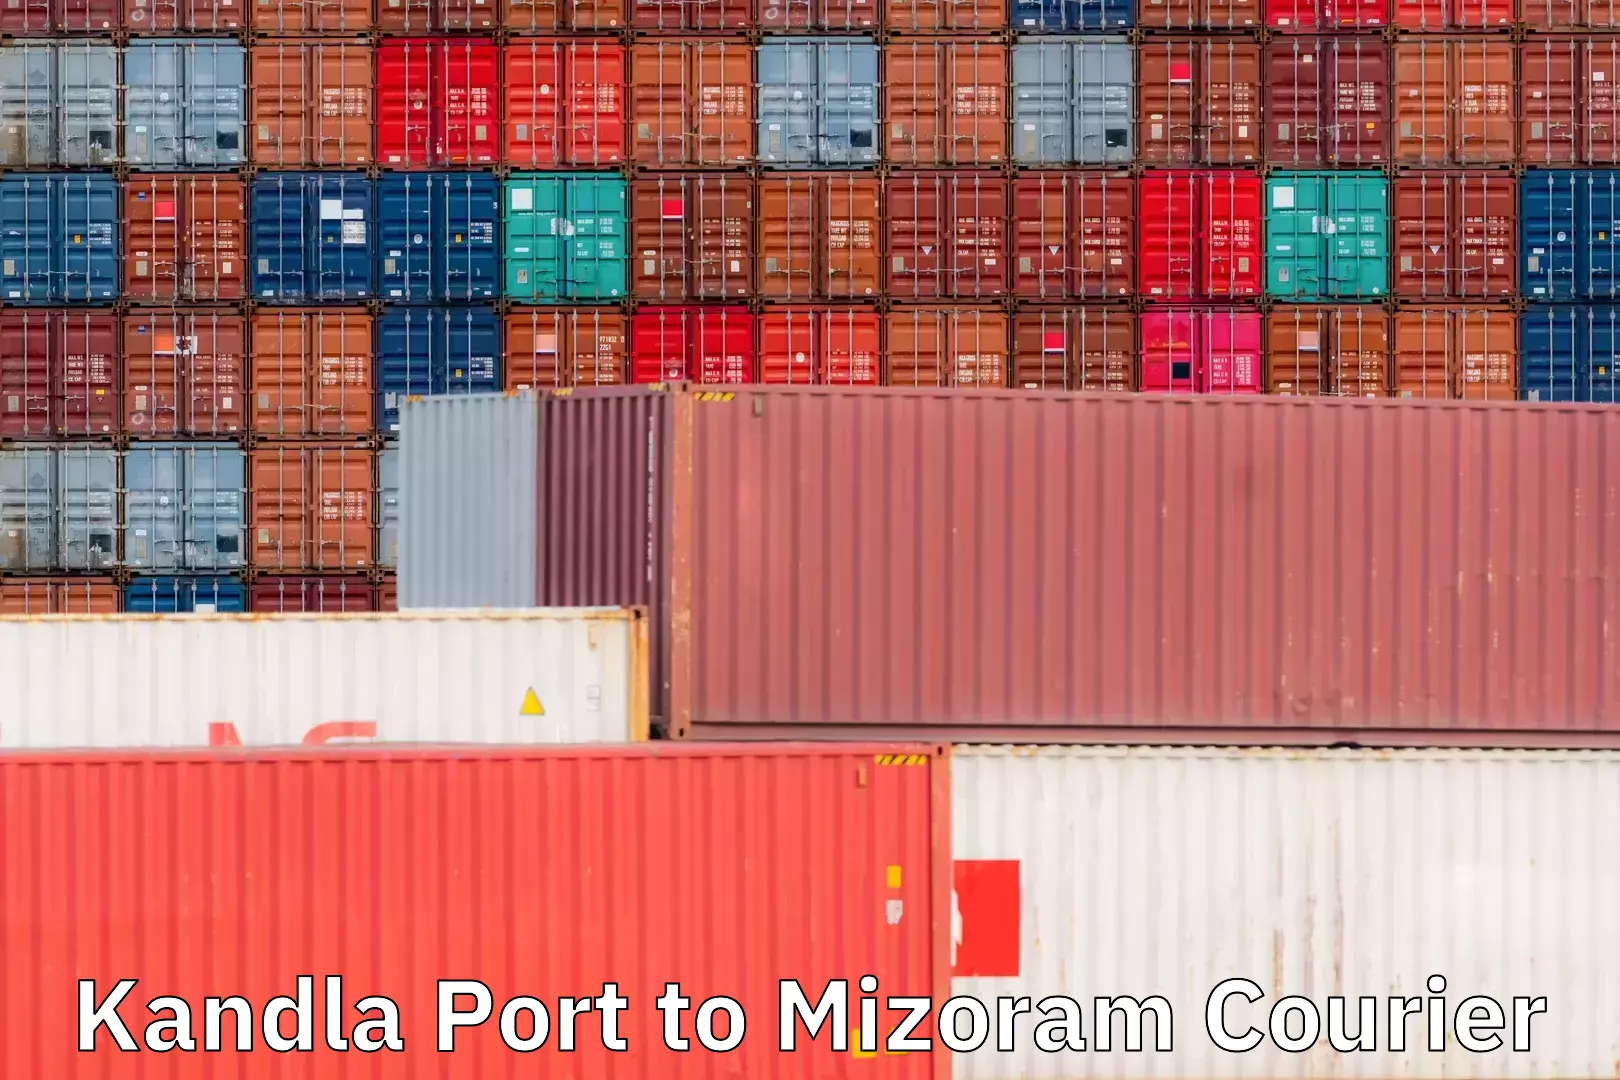 Courier dispatch services in Kandla Port to Mizoram